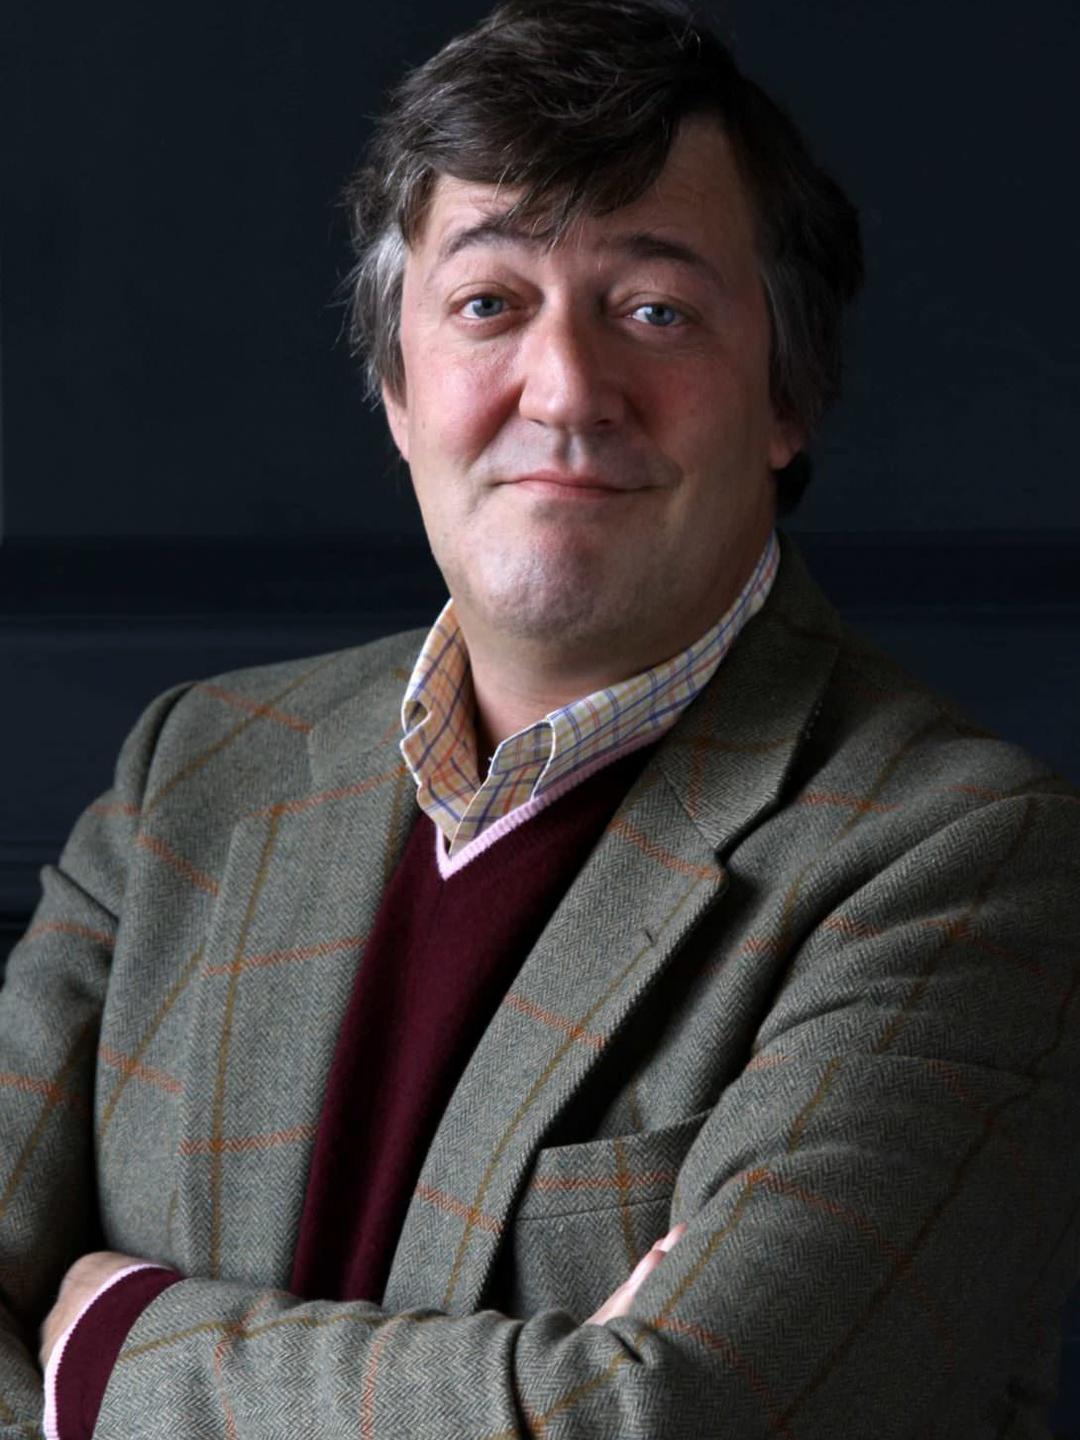 Stephen Fry young photos